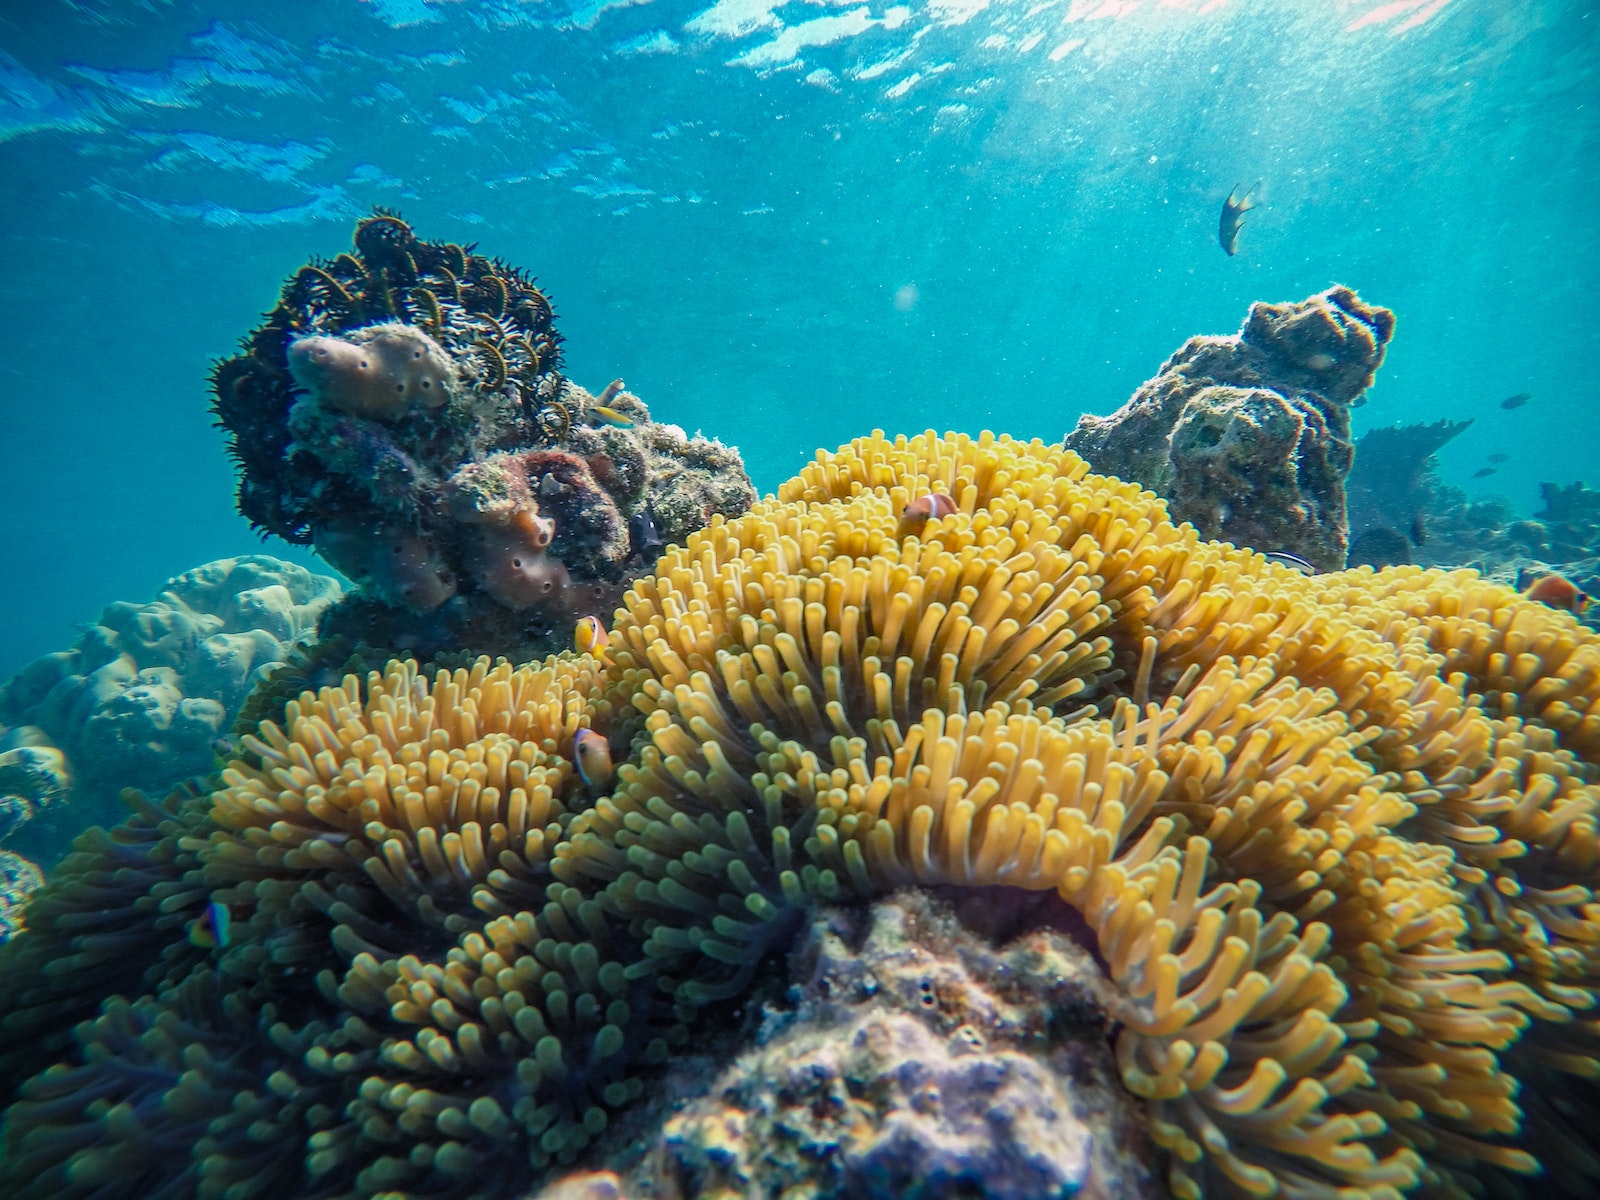 The Great Barrier Reef Shoals